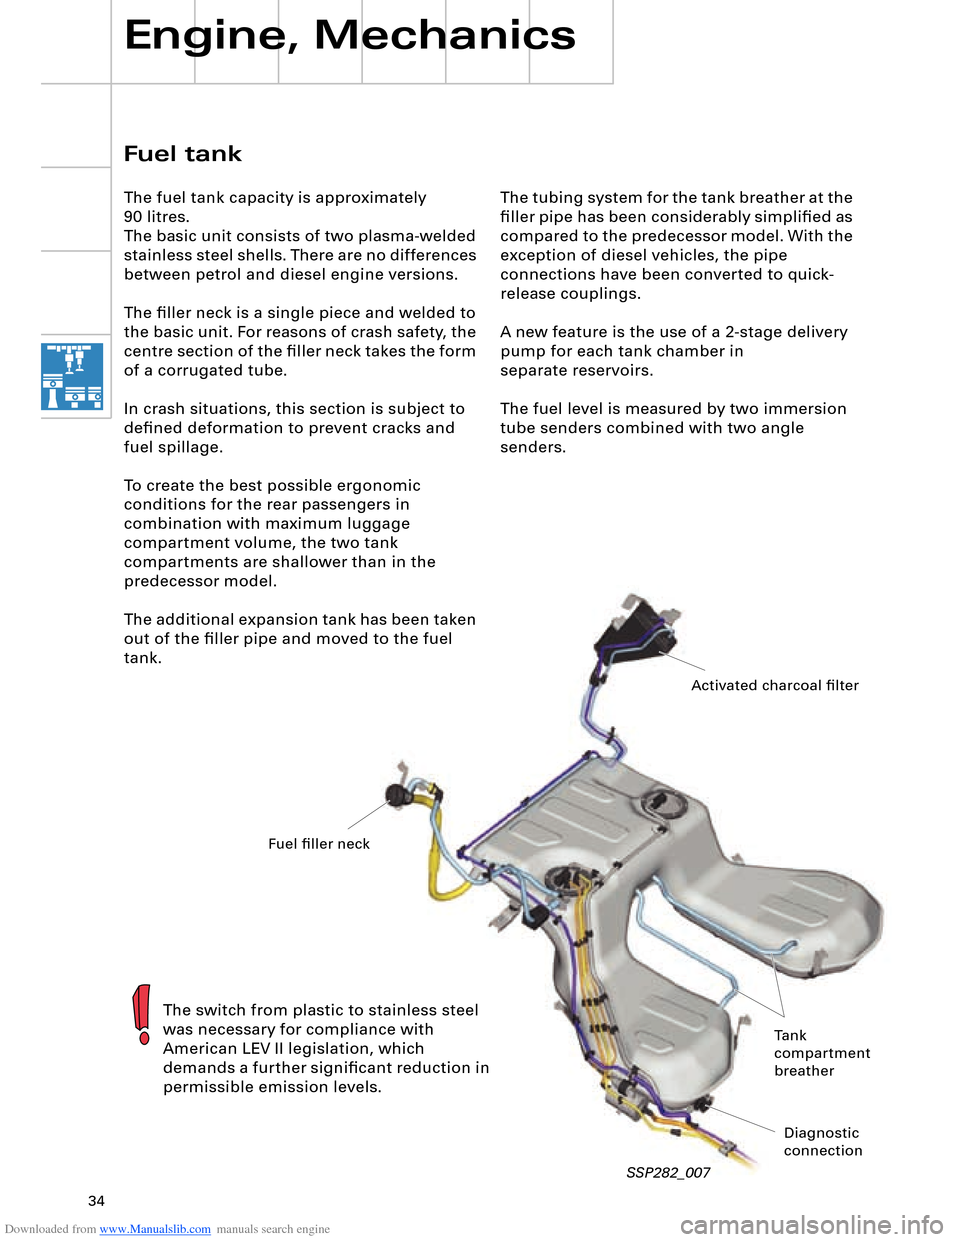 AUDI A8 2003 D3 / 2.G Technical Features Manual Downloaded from www.Manualslib.com manuals search engine 34
The tubing system for the tank breather at the 
ﬁller pipe has been considerably simpliﬁed as 
compared to the predecessor model. With t